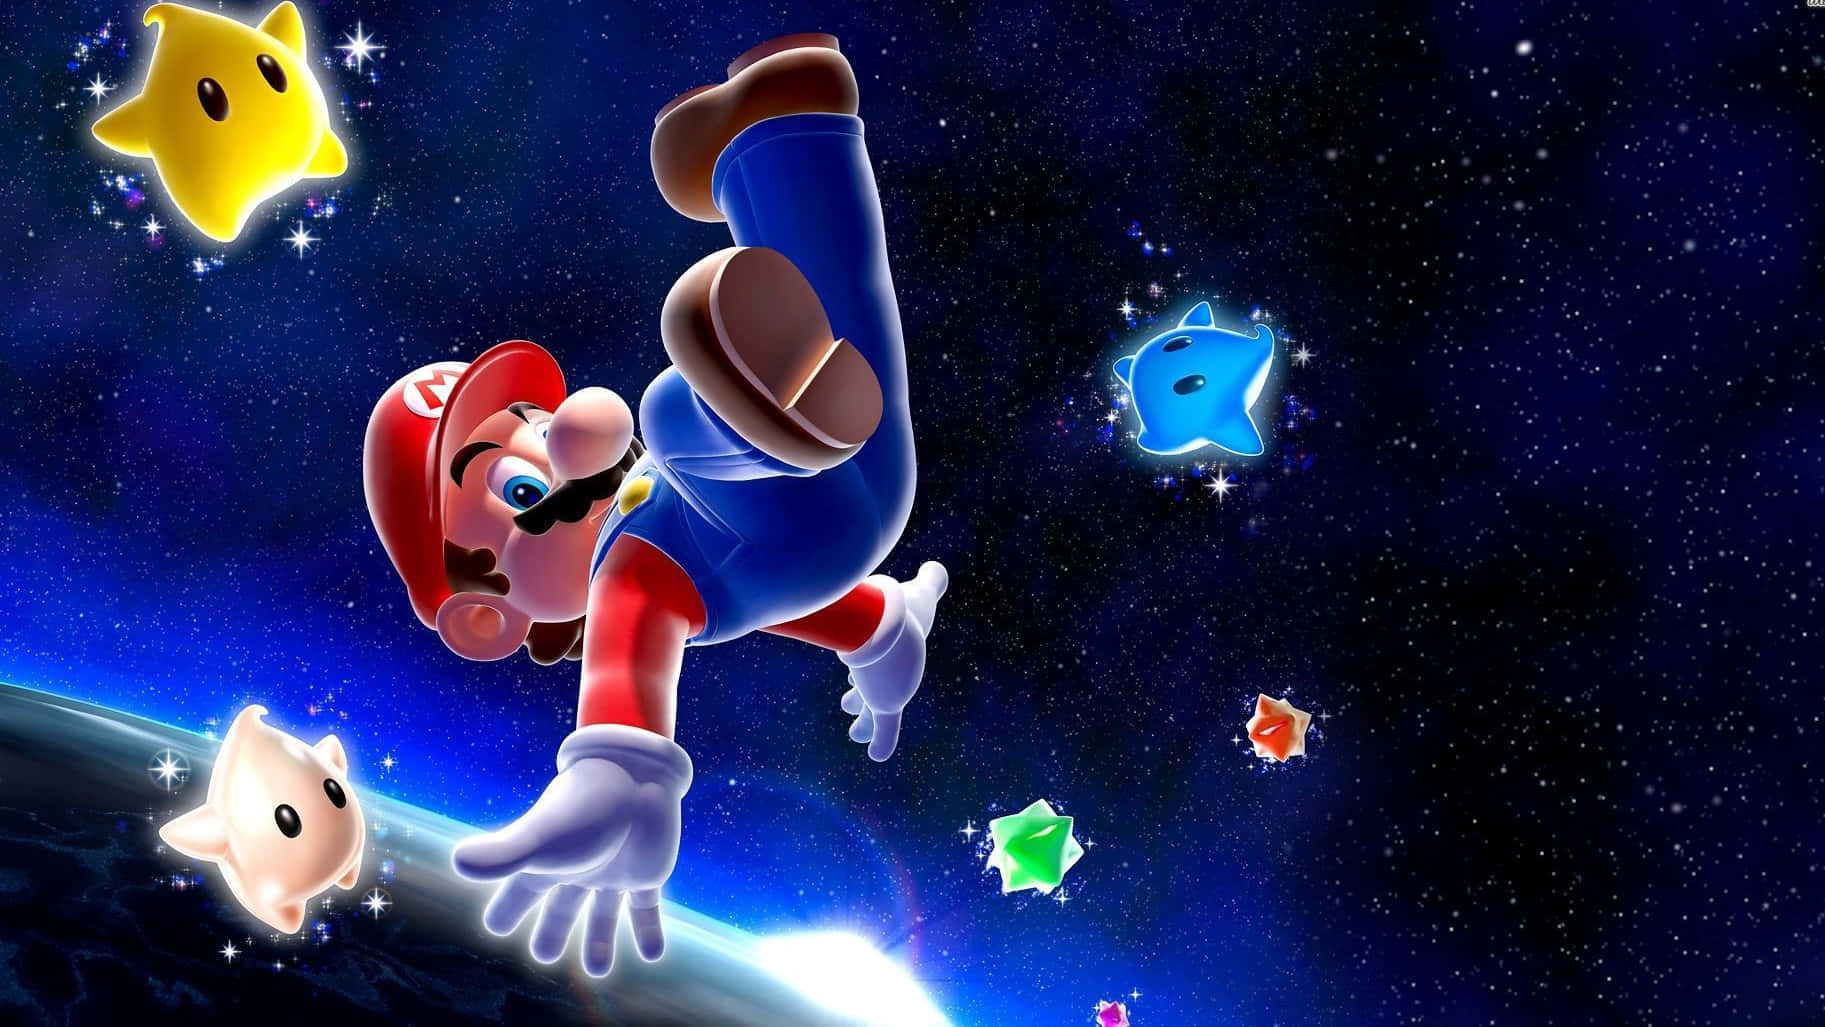 Join Mario on a Pixelated Journey Through Space! Wallpaper